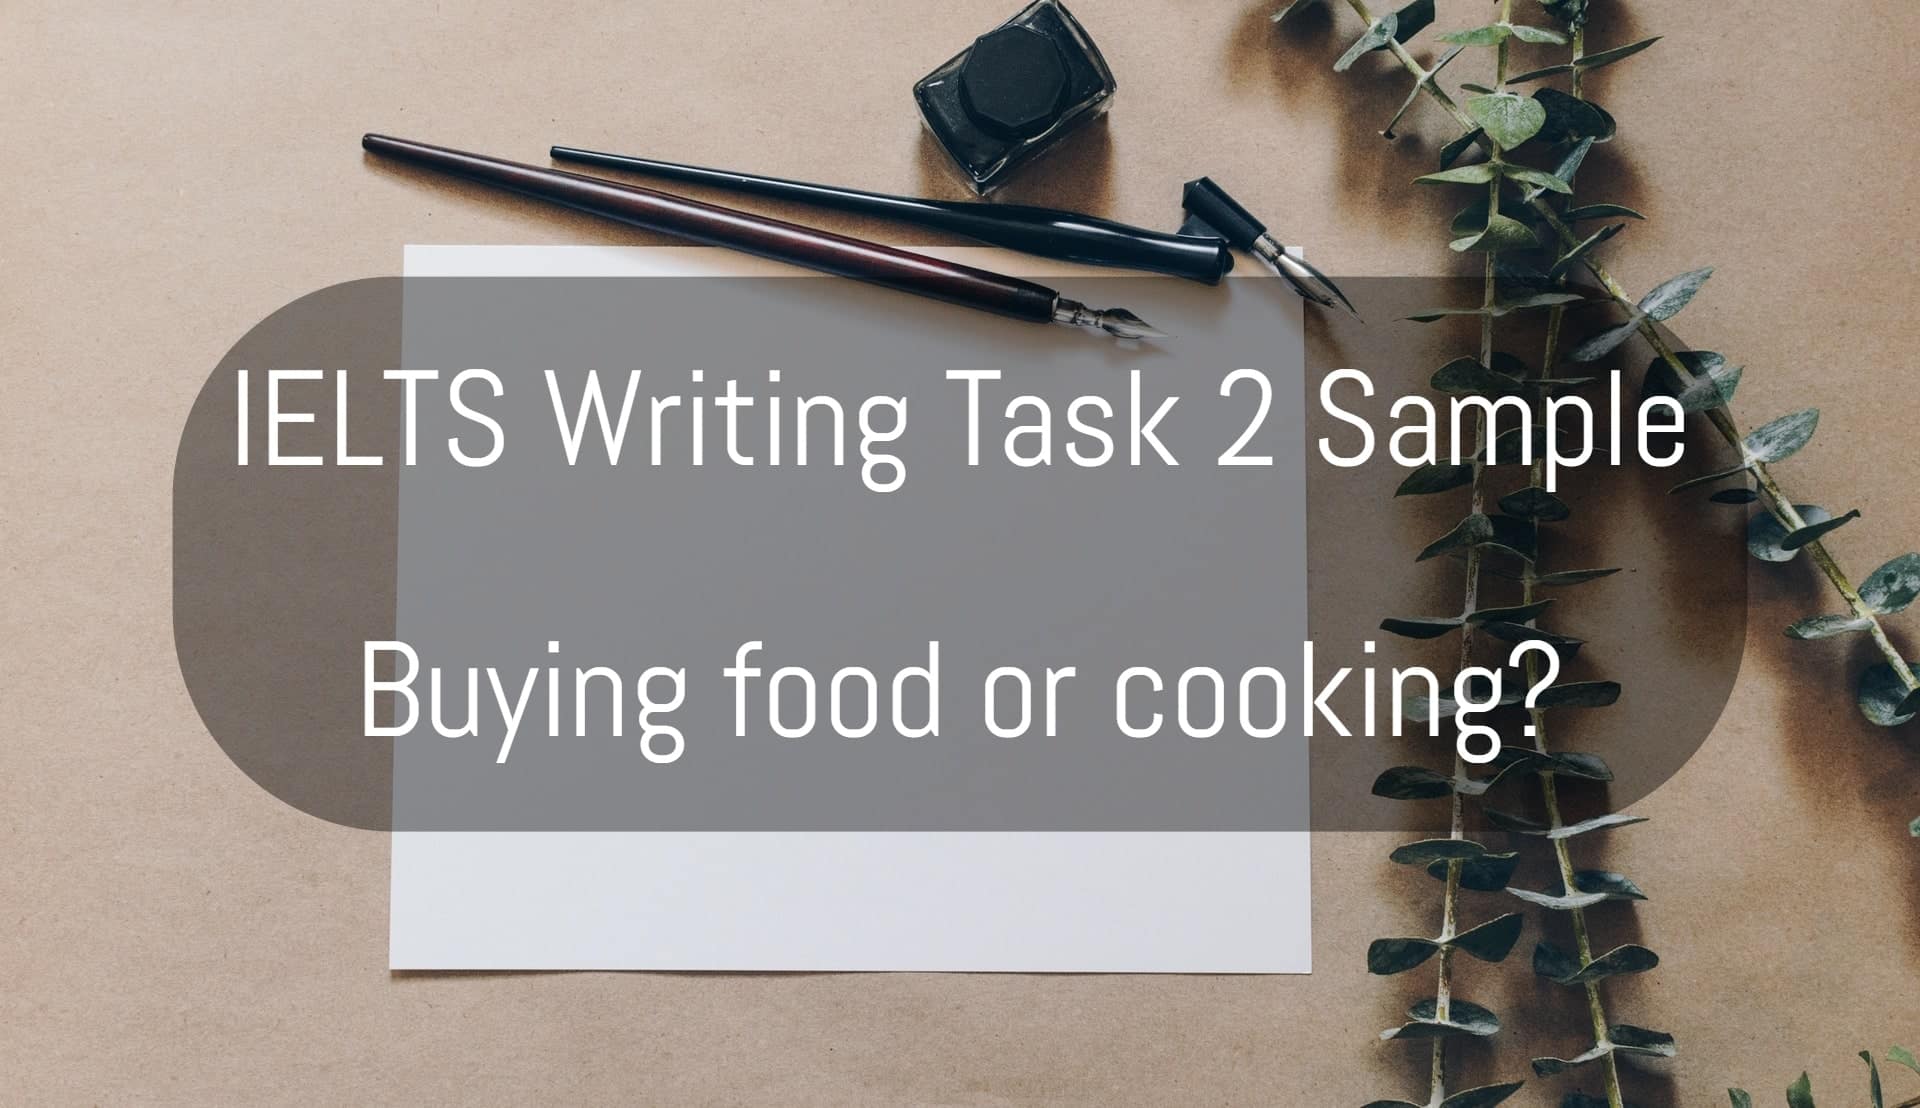 IELTS writing sample buying food or cooking-min